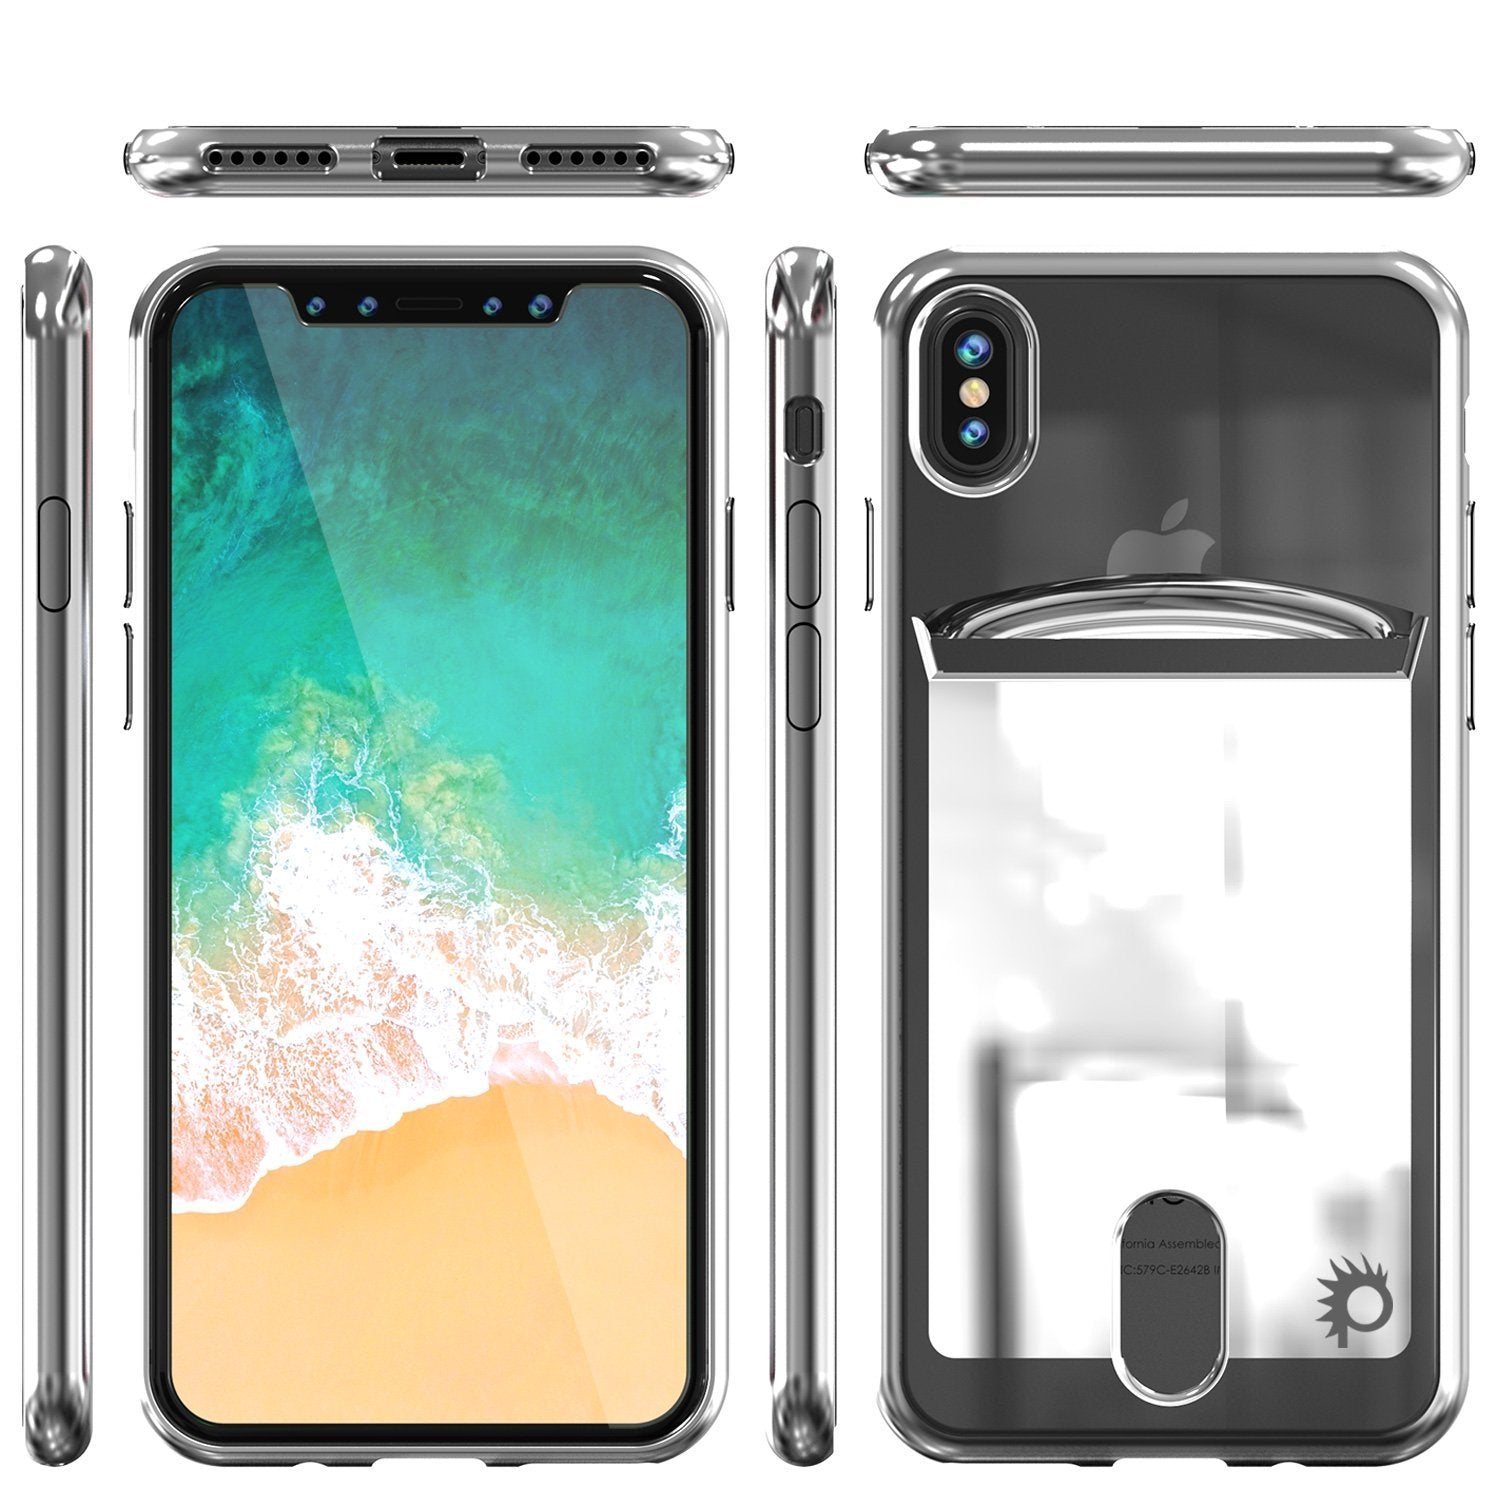 iPhone X Case, PUNKcase [LUCID Series] Slim Fit Protective Dual Layer Armor Cover W/ Scratch Resistant PUNKSHIELD Screen Protector [SILVER]